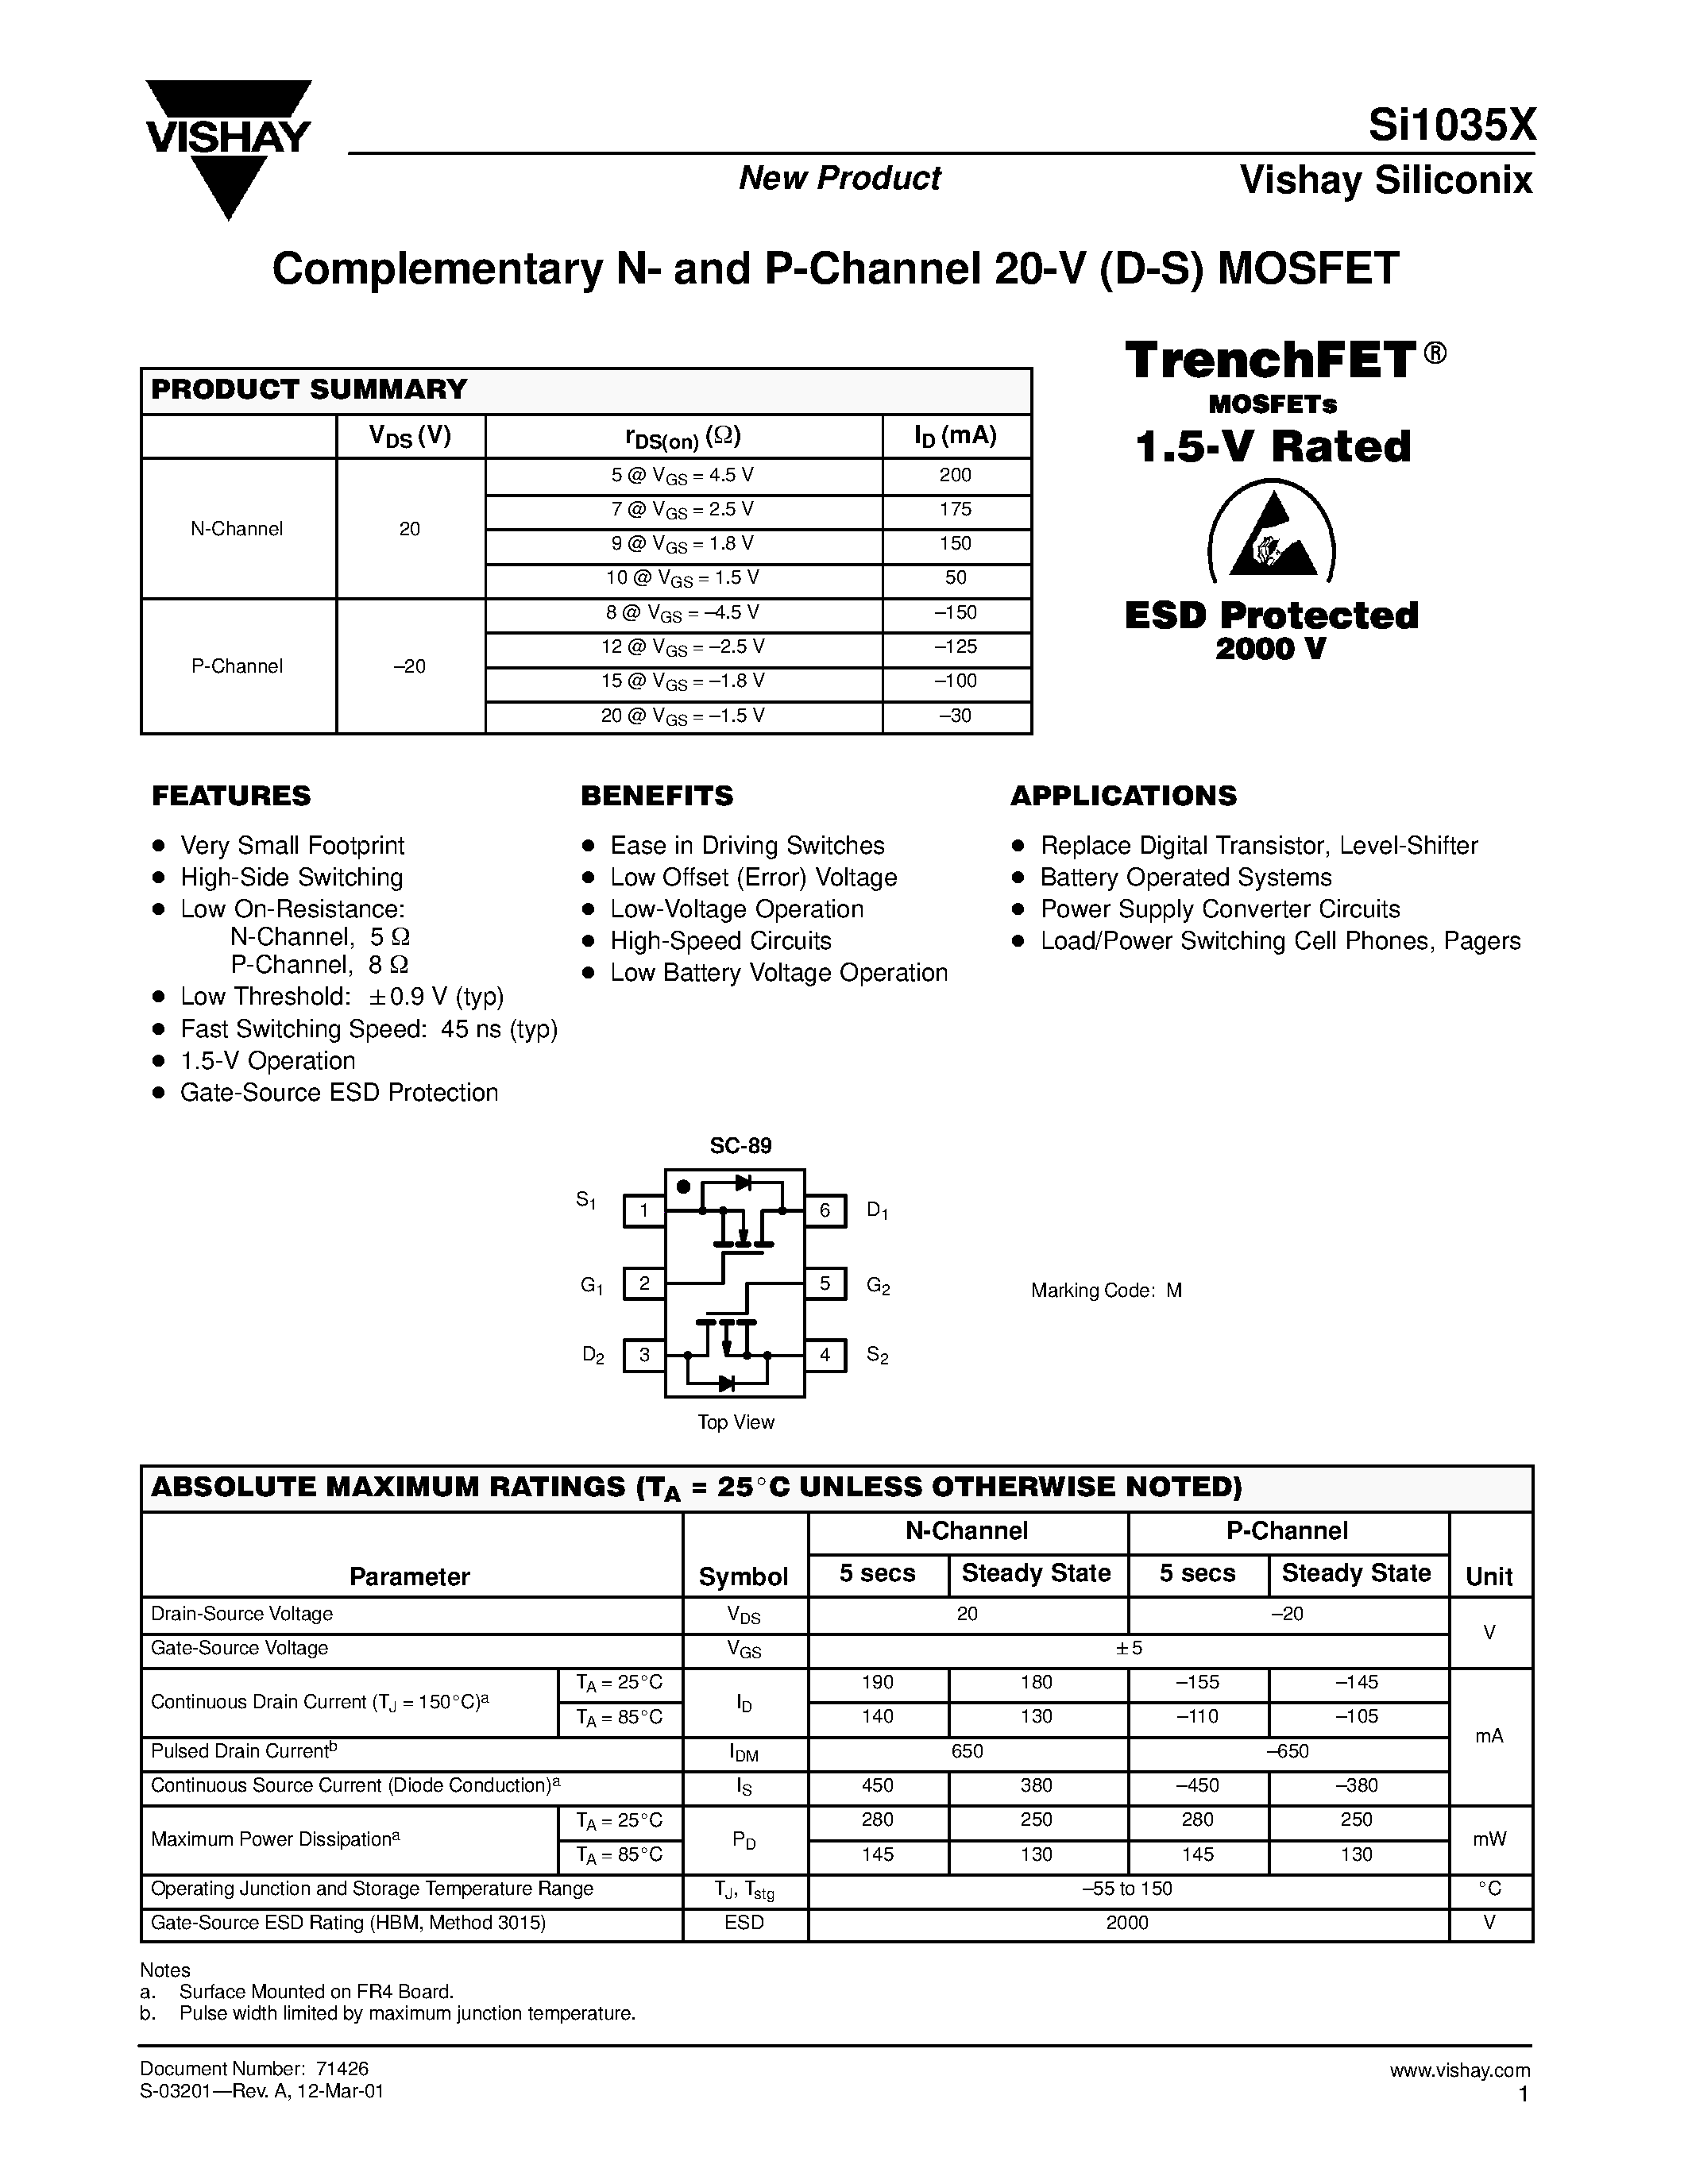 Даташит SI1035X - Complementary N- and P-Channel 20-V (D-S) MOSFET страница 1